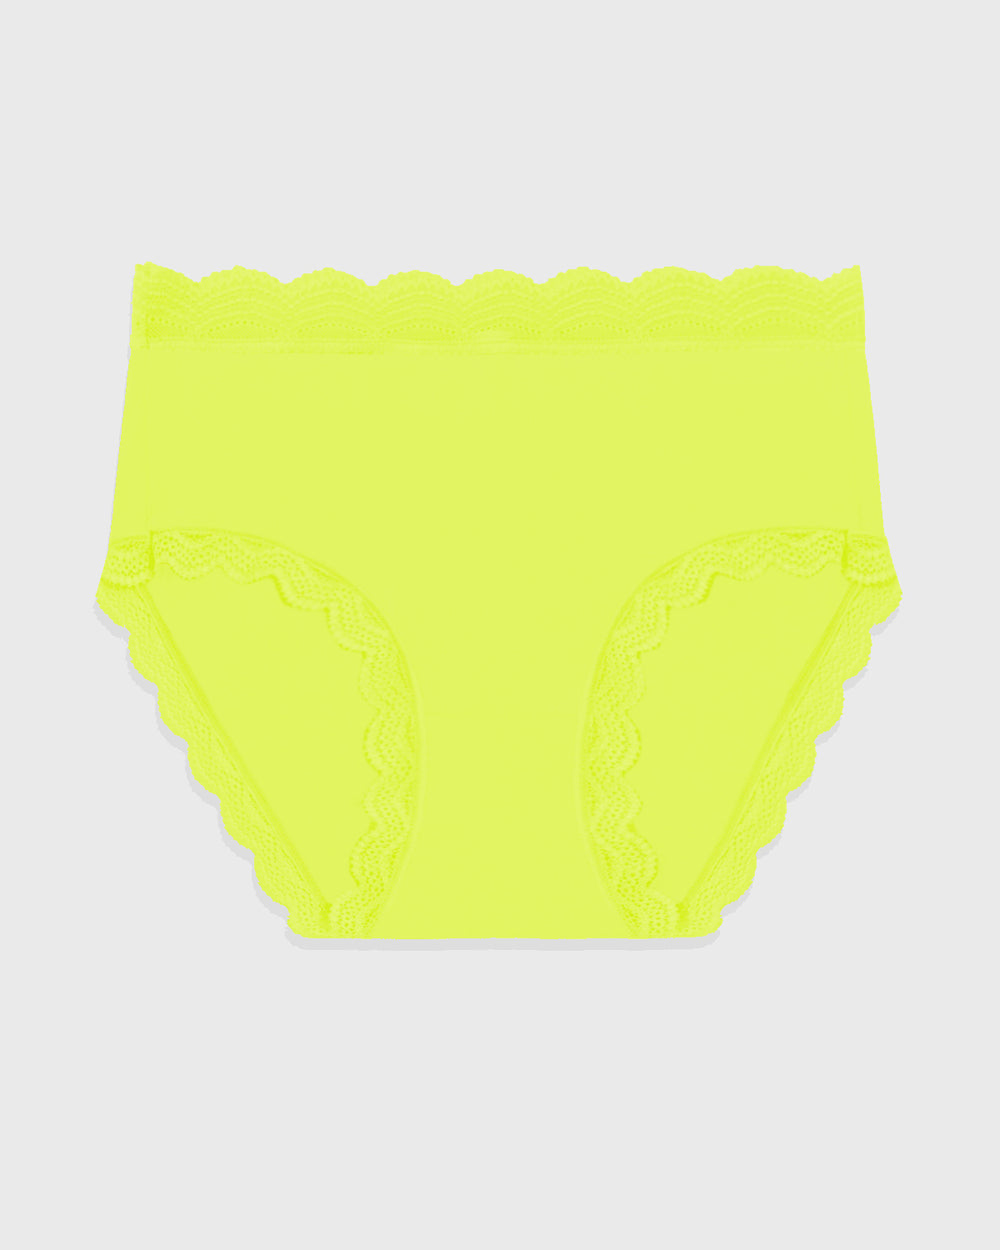 HIGH RISE UNDIES IN YELLOW CALICO